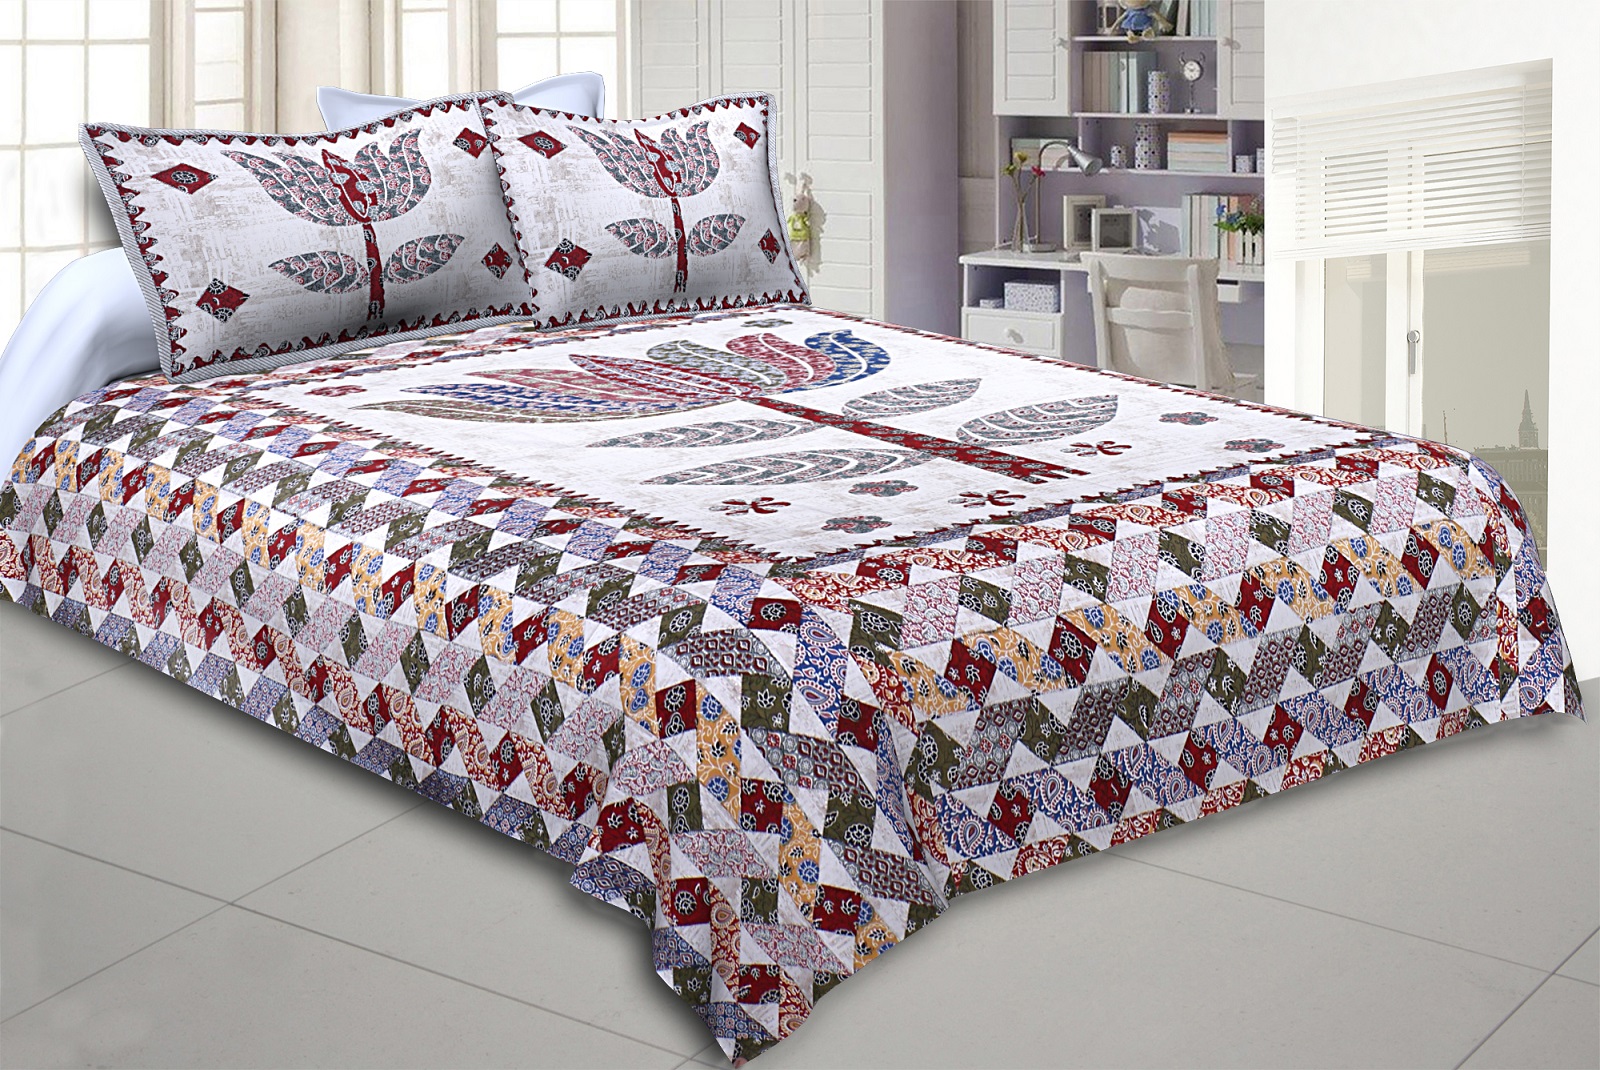 The Big Lotus in Mulitoclor Double BedSheet